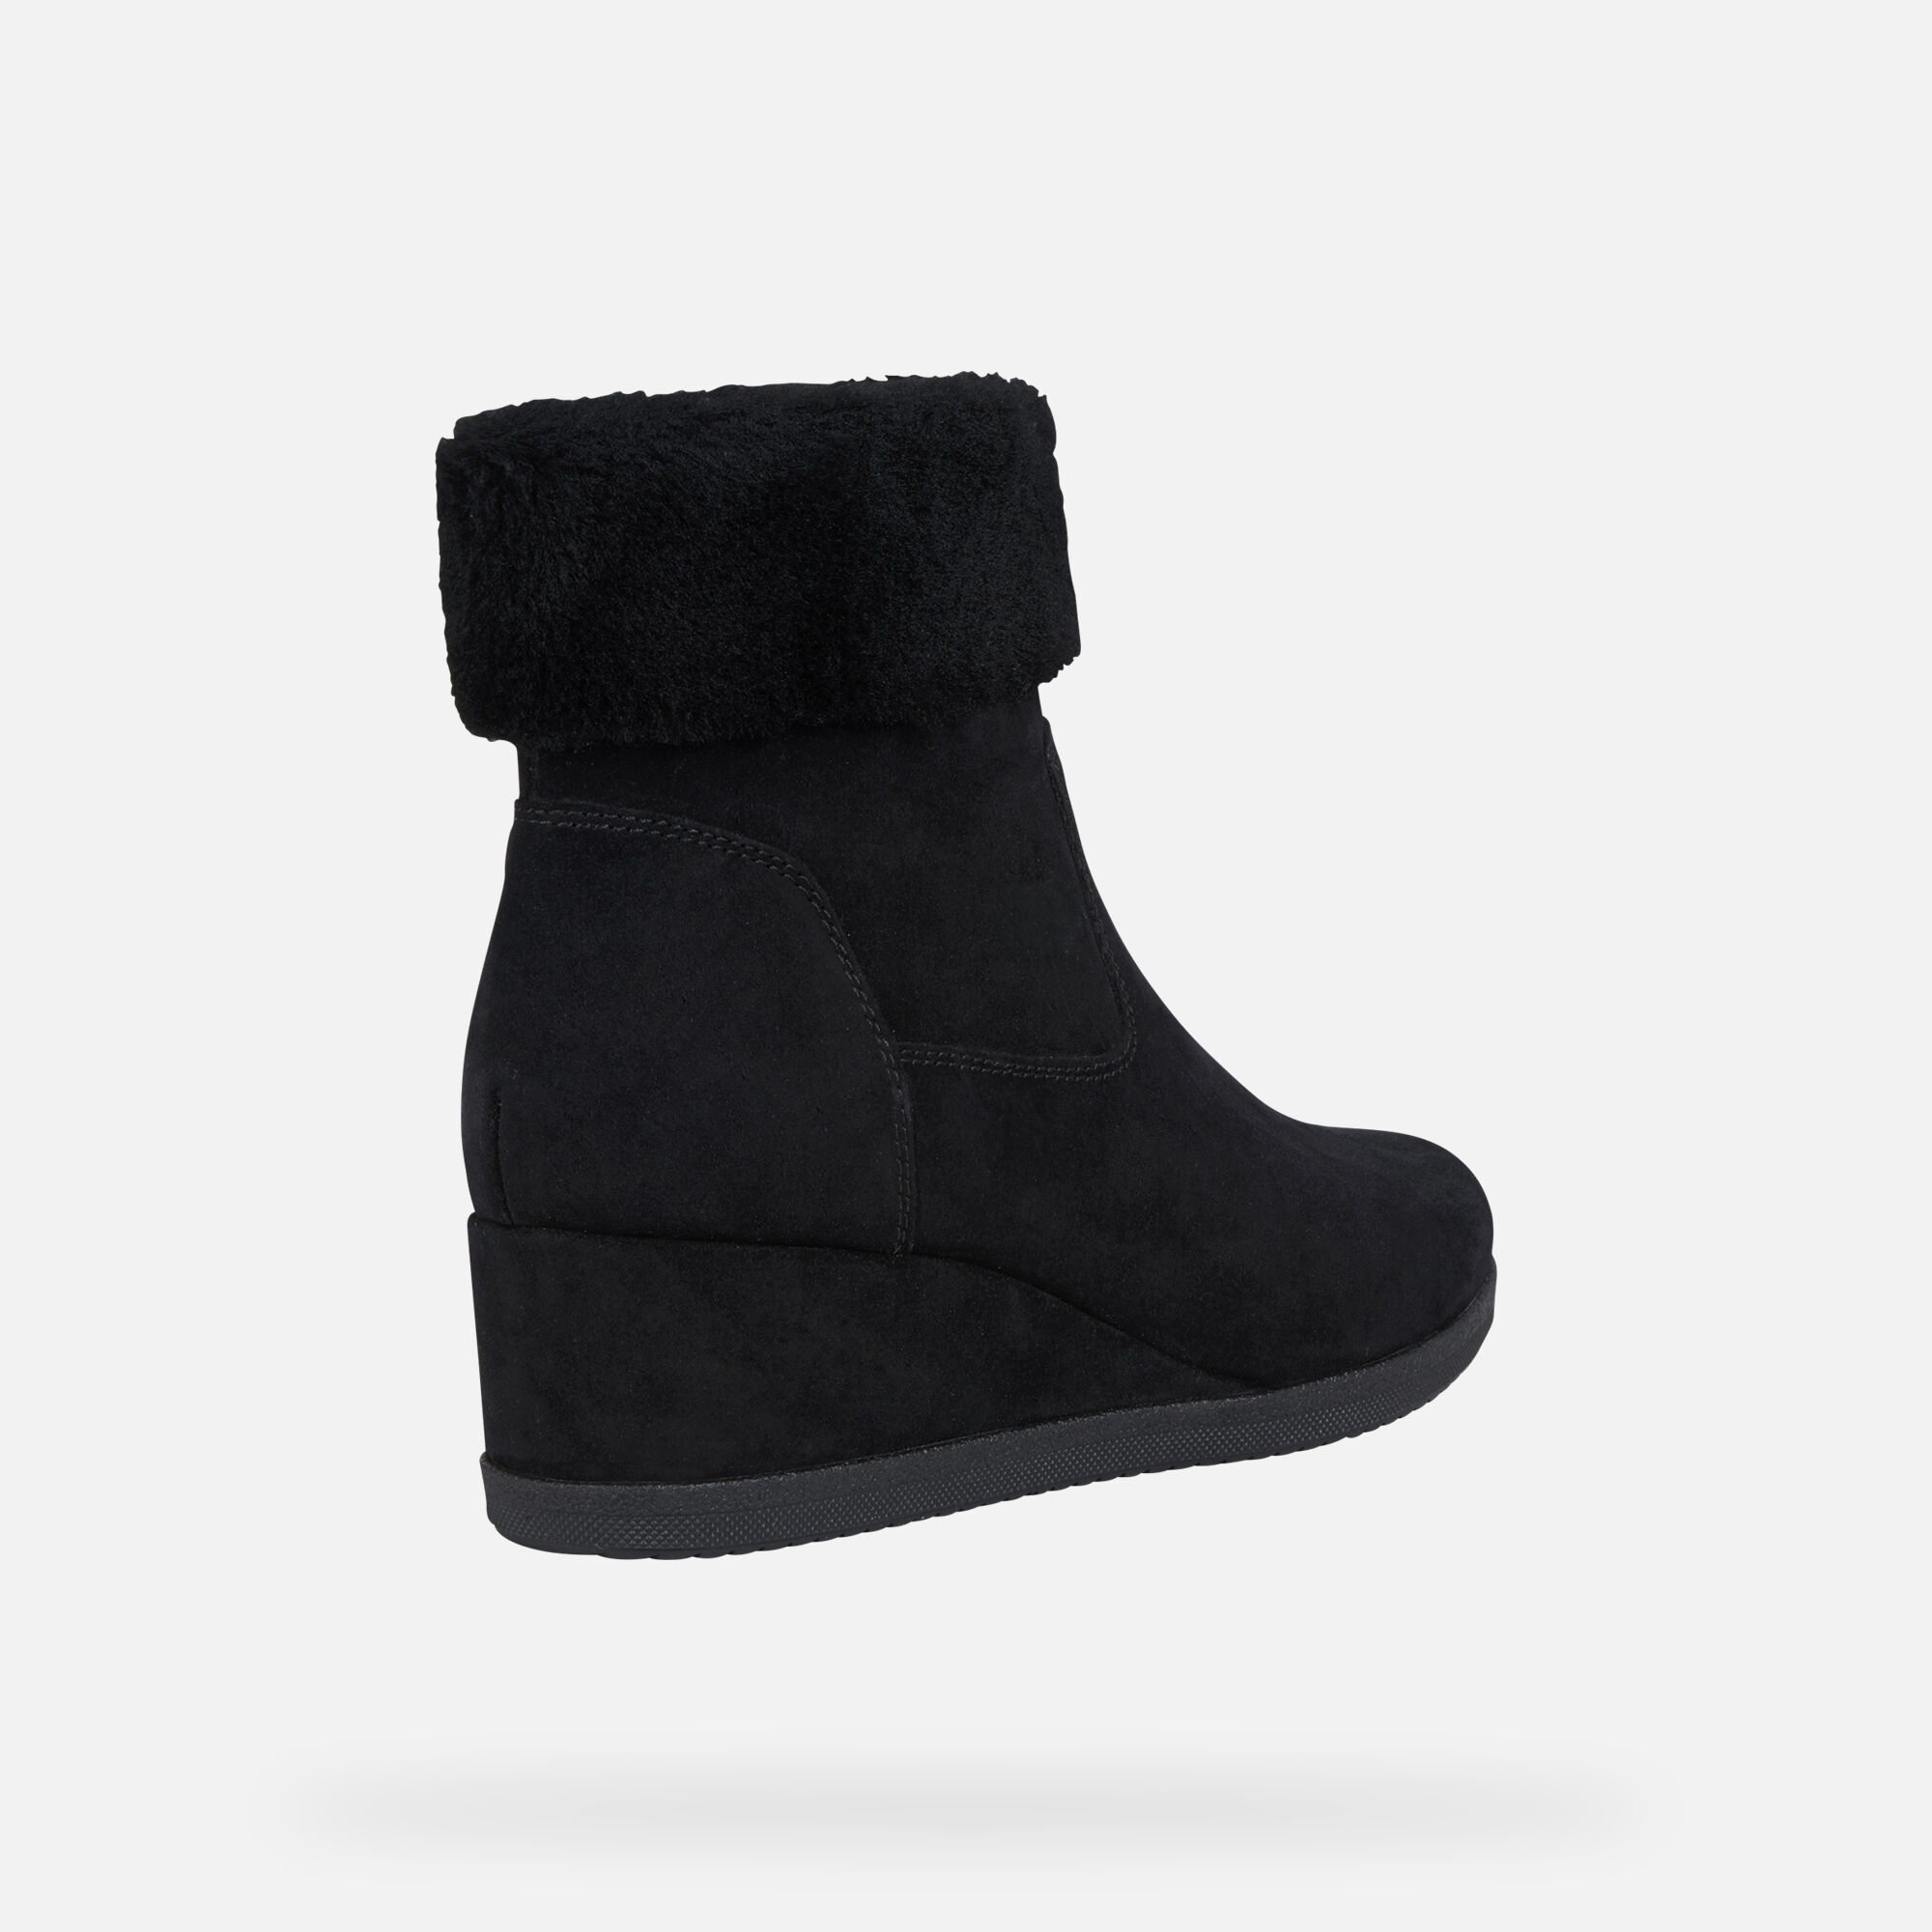 ANYLLA WEDGE WOMAN - ANKLE BOOTS from 